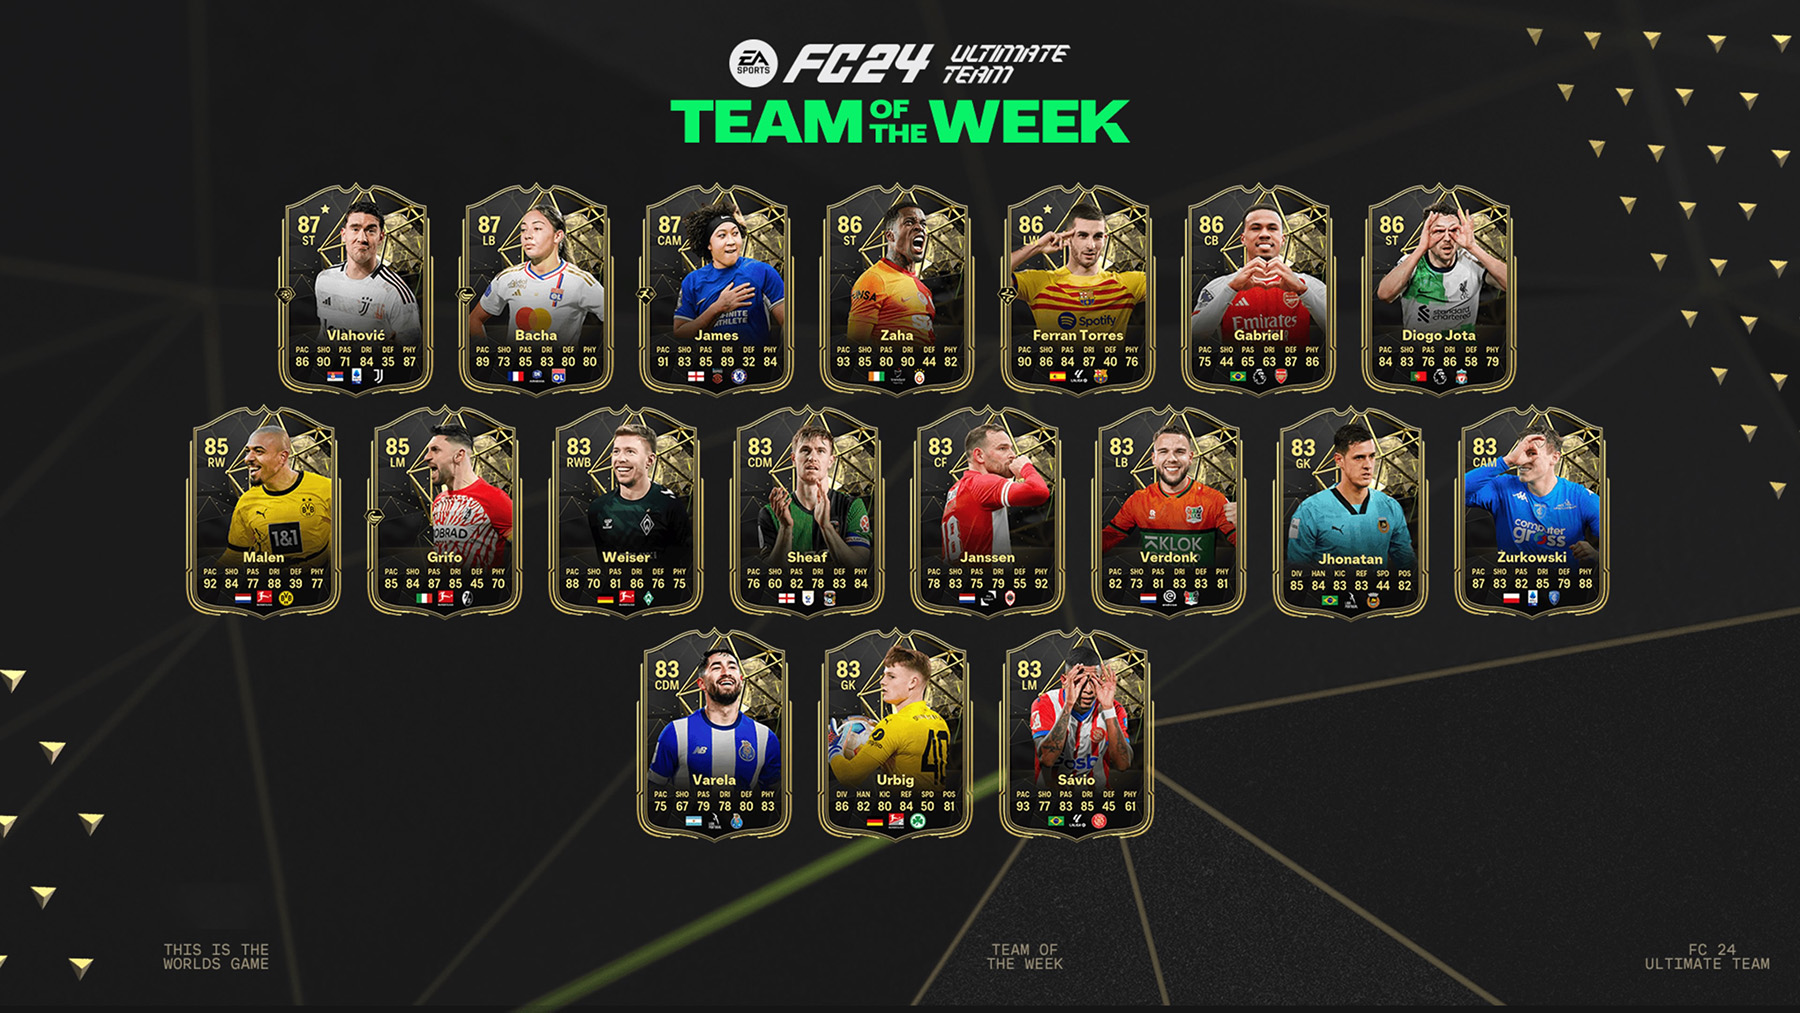 EA Sports FC 24 Team of the Week 19 is available from 24 January (6pm UK).